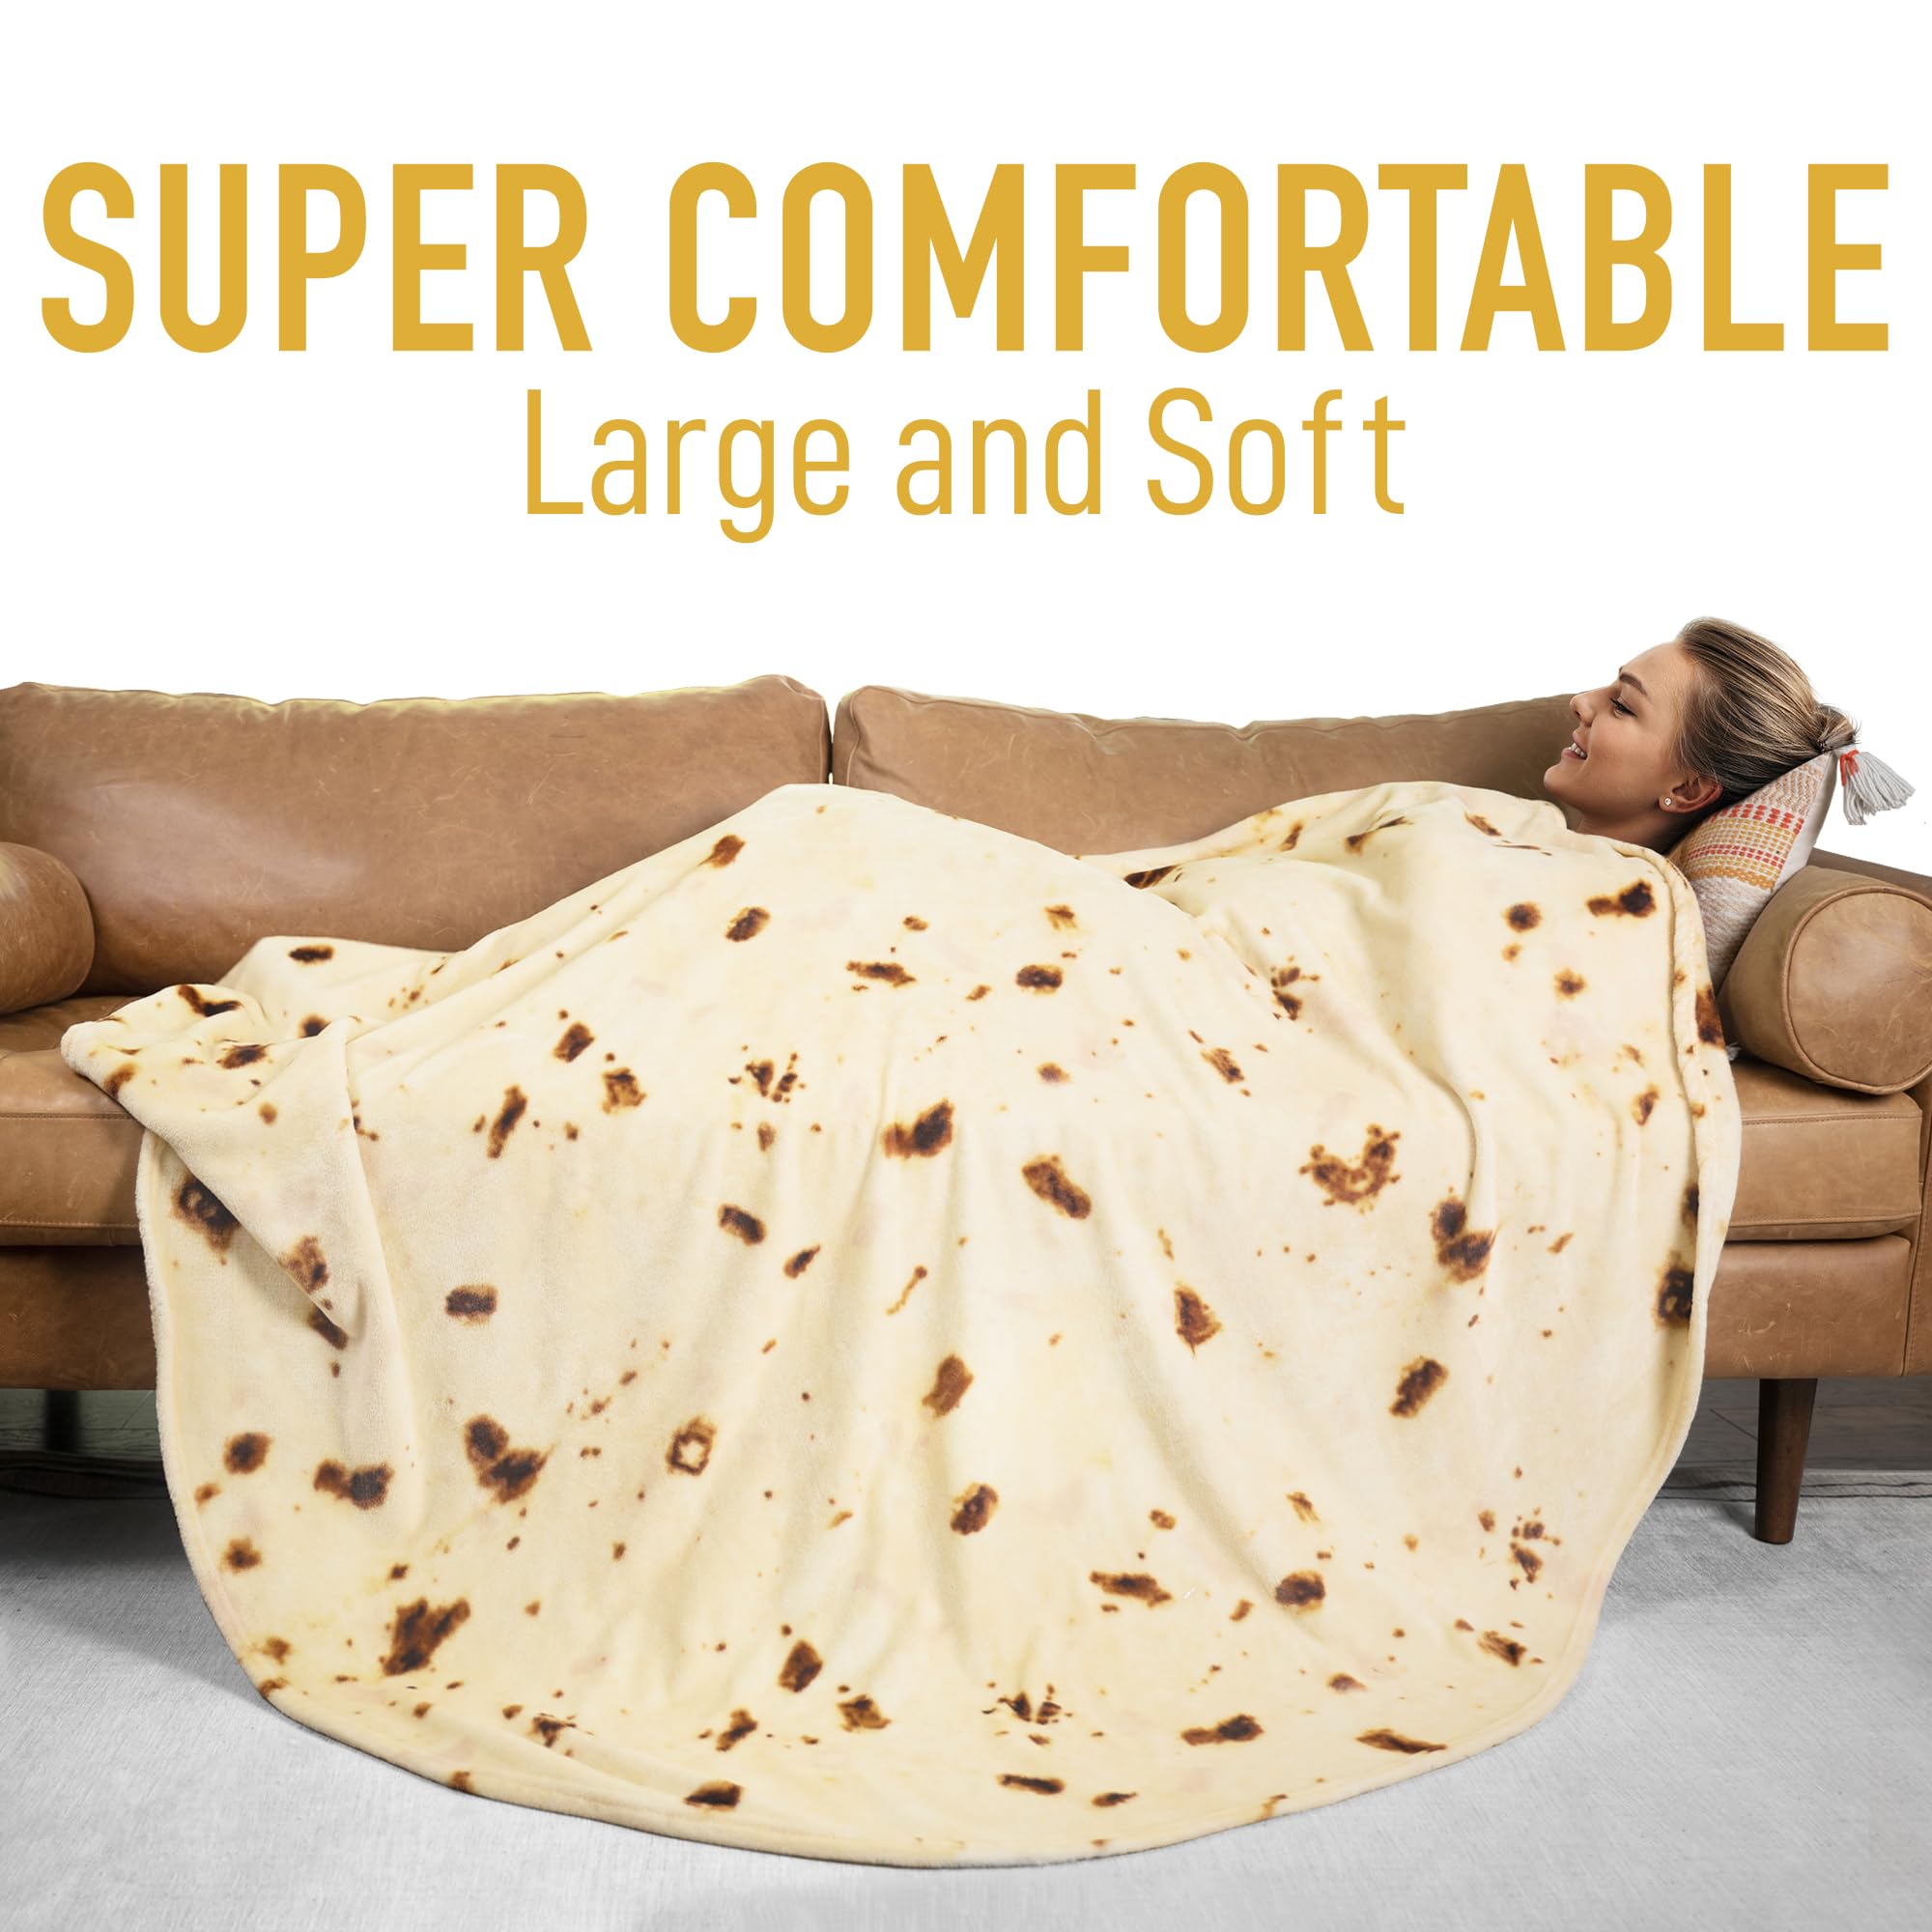 Zulay Burritos Tortilla Blanket Wrap - Double Sided Large 60 inches Blanket - Holiday Novelty Blanket - Soft Flannel Round Blanket Premium 280 GSM - Fun White Elephant Gift for Adults